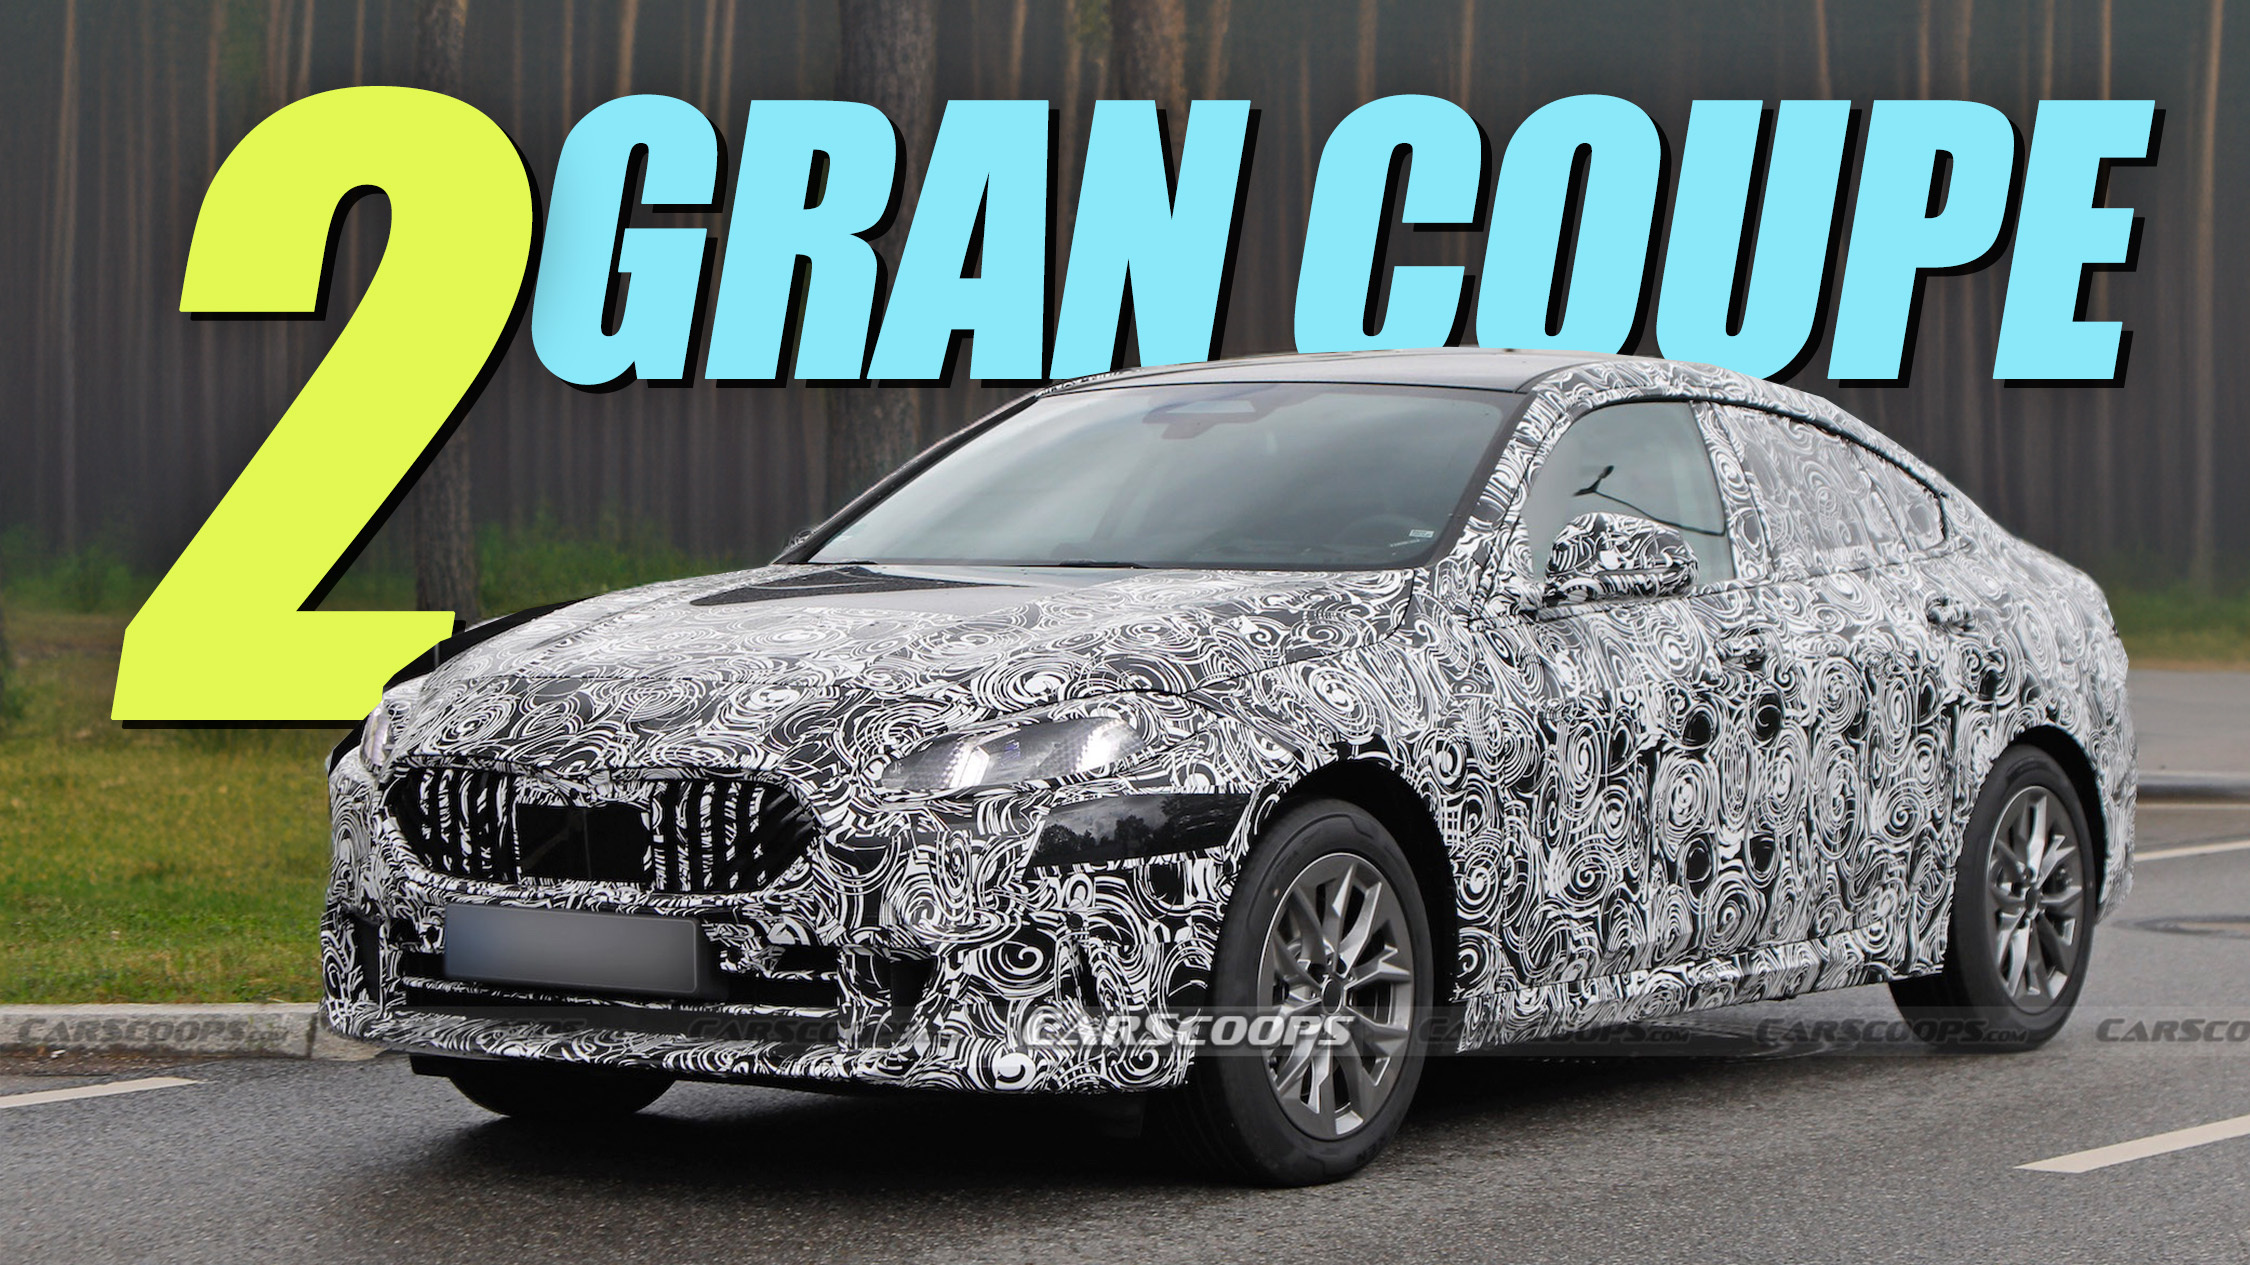 2025 BMW 2 Series Gran Coupé dispenses with camouflage and shows controversial grille bars